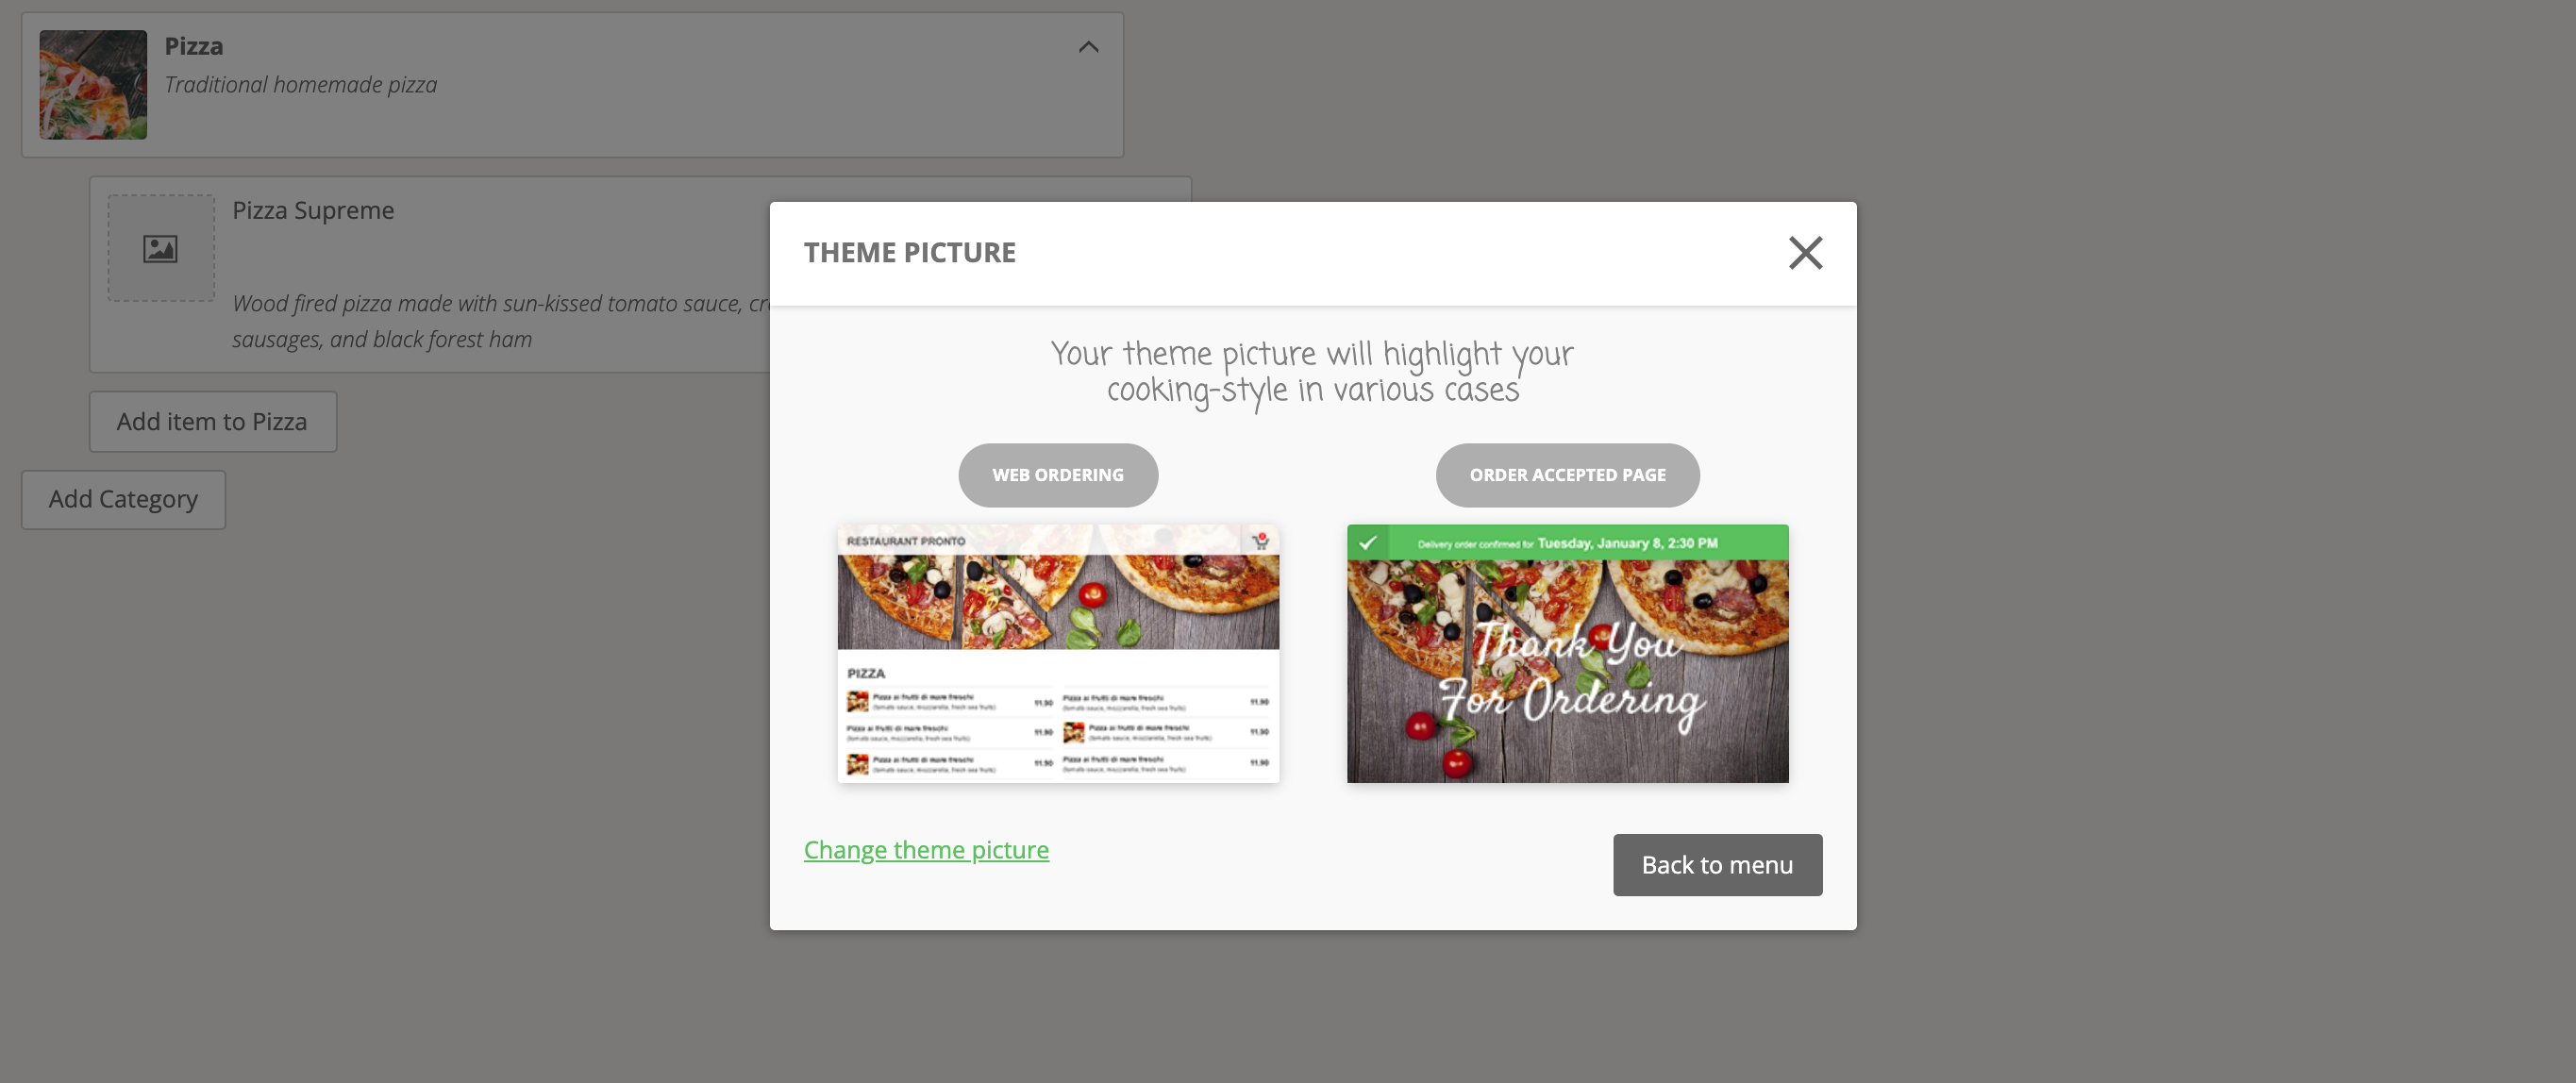 personalized types of menus in restaurants: cover photos